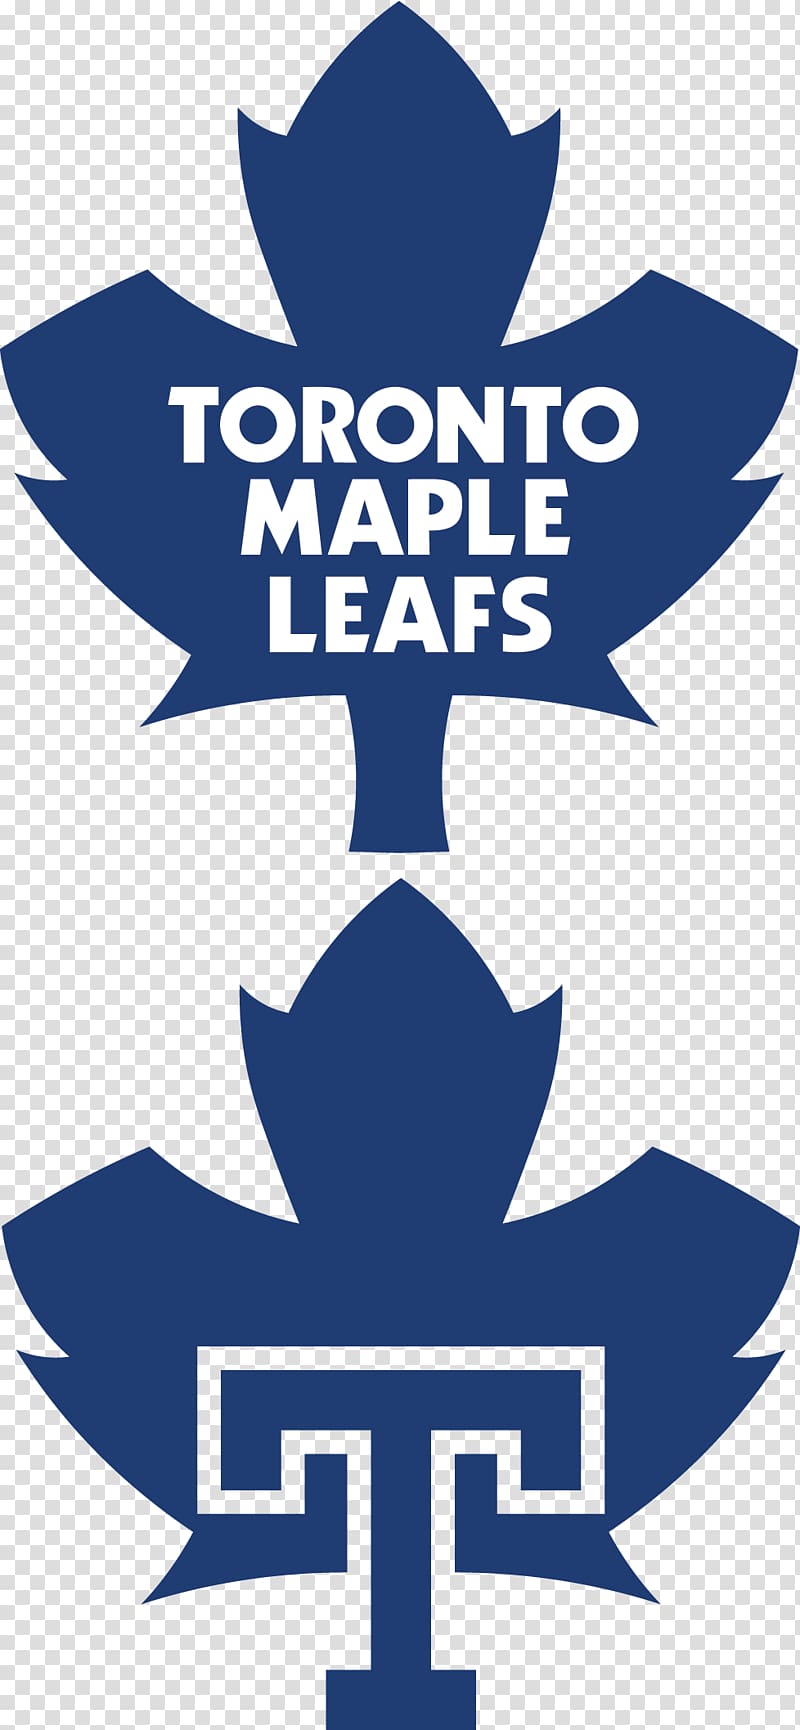 Toronto Maple Leafs National Hockey League Scotiabank Arena St. John's Maple Leafs Toronto Marlies, red maple leaf logo transparent background PNG clipart